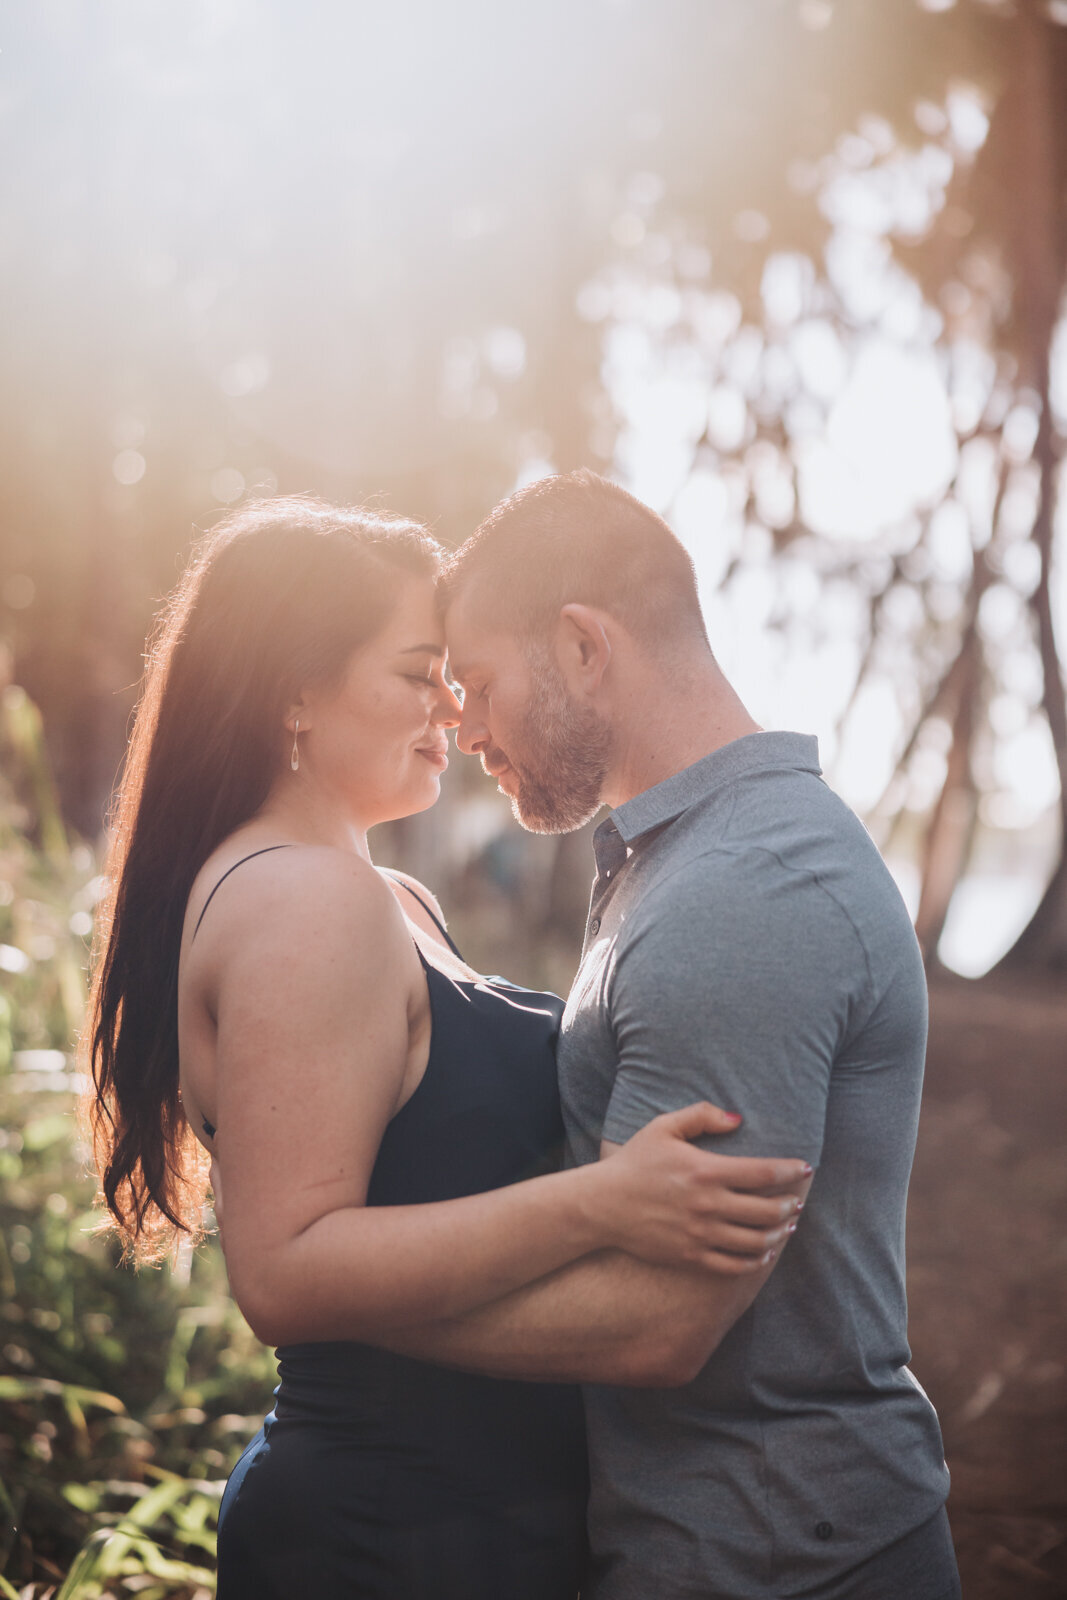 Hawaii's best couples and engagement photography at Gentle Blossom Snaps